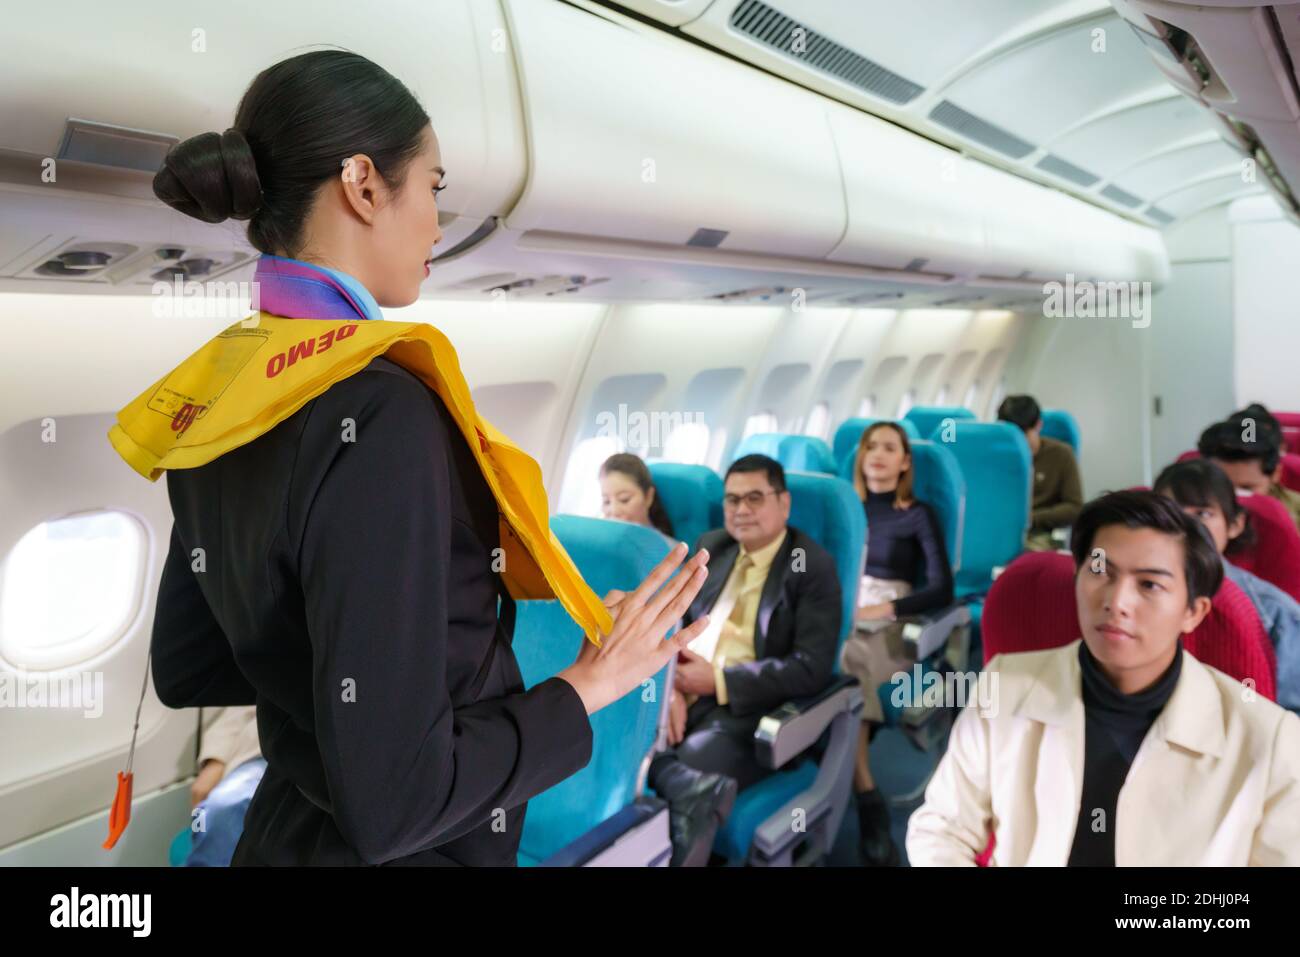 Asian Air hostess staff airline demonstrate safety procedures to passengers prior to flight take off in cabin airplane. Stock Photo